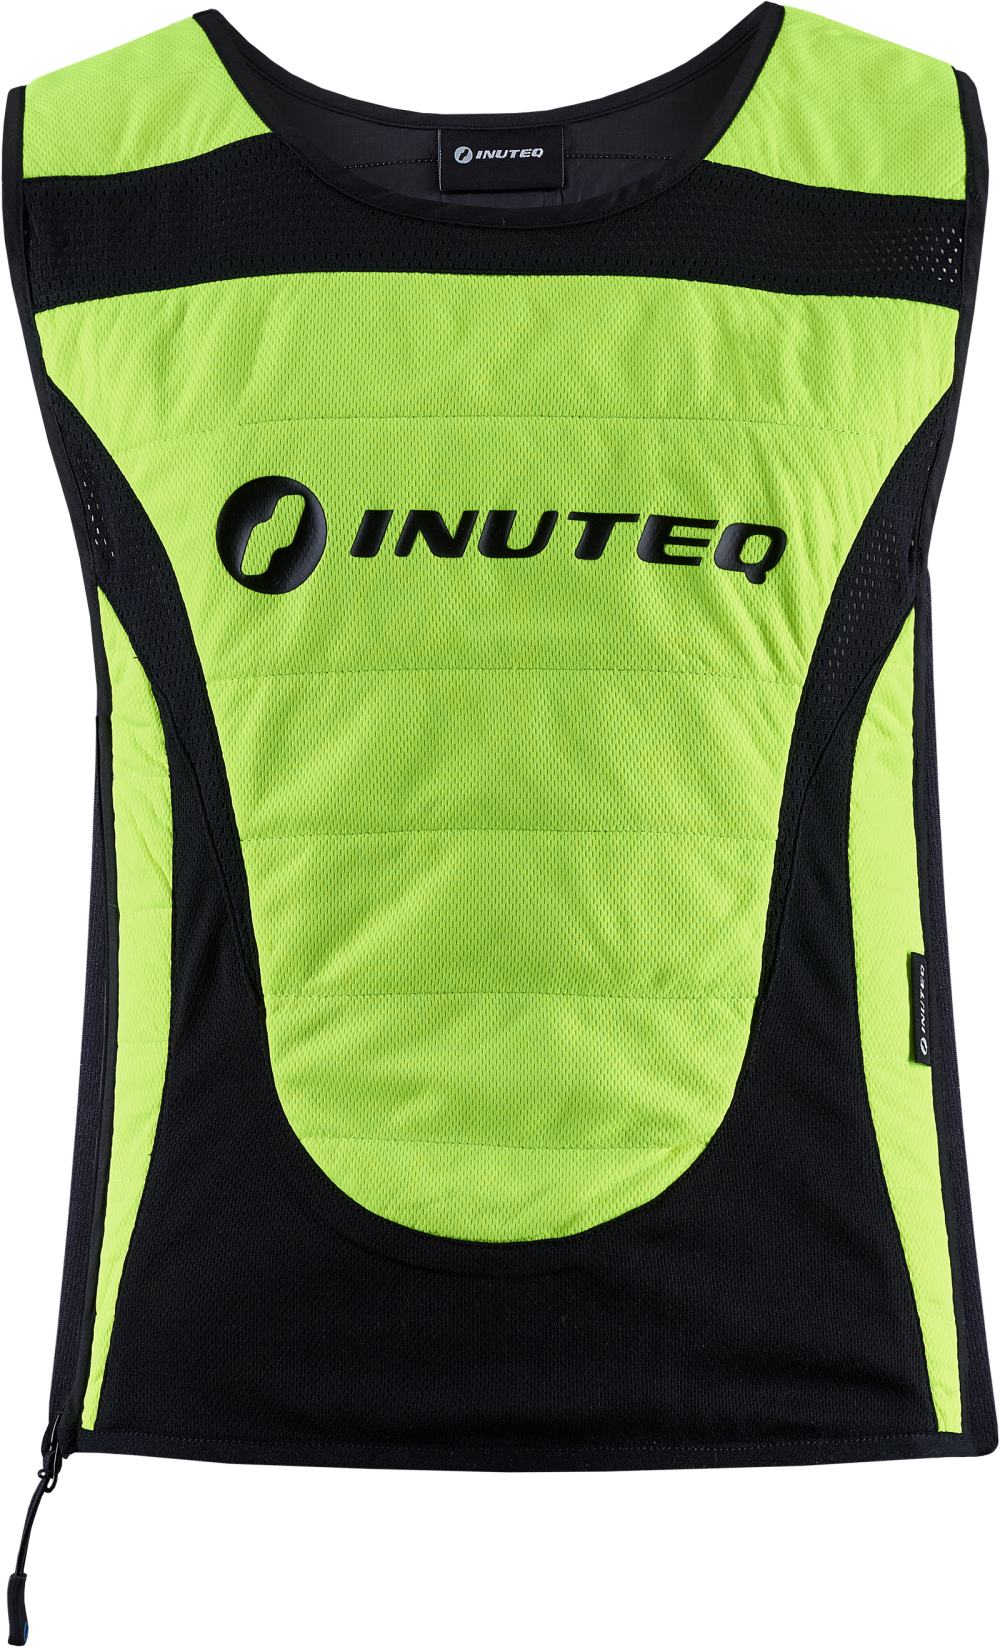 INUTEQ BODYCOOL PRO-A LIME